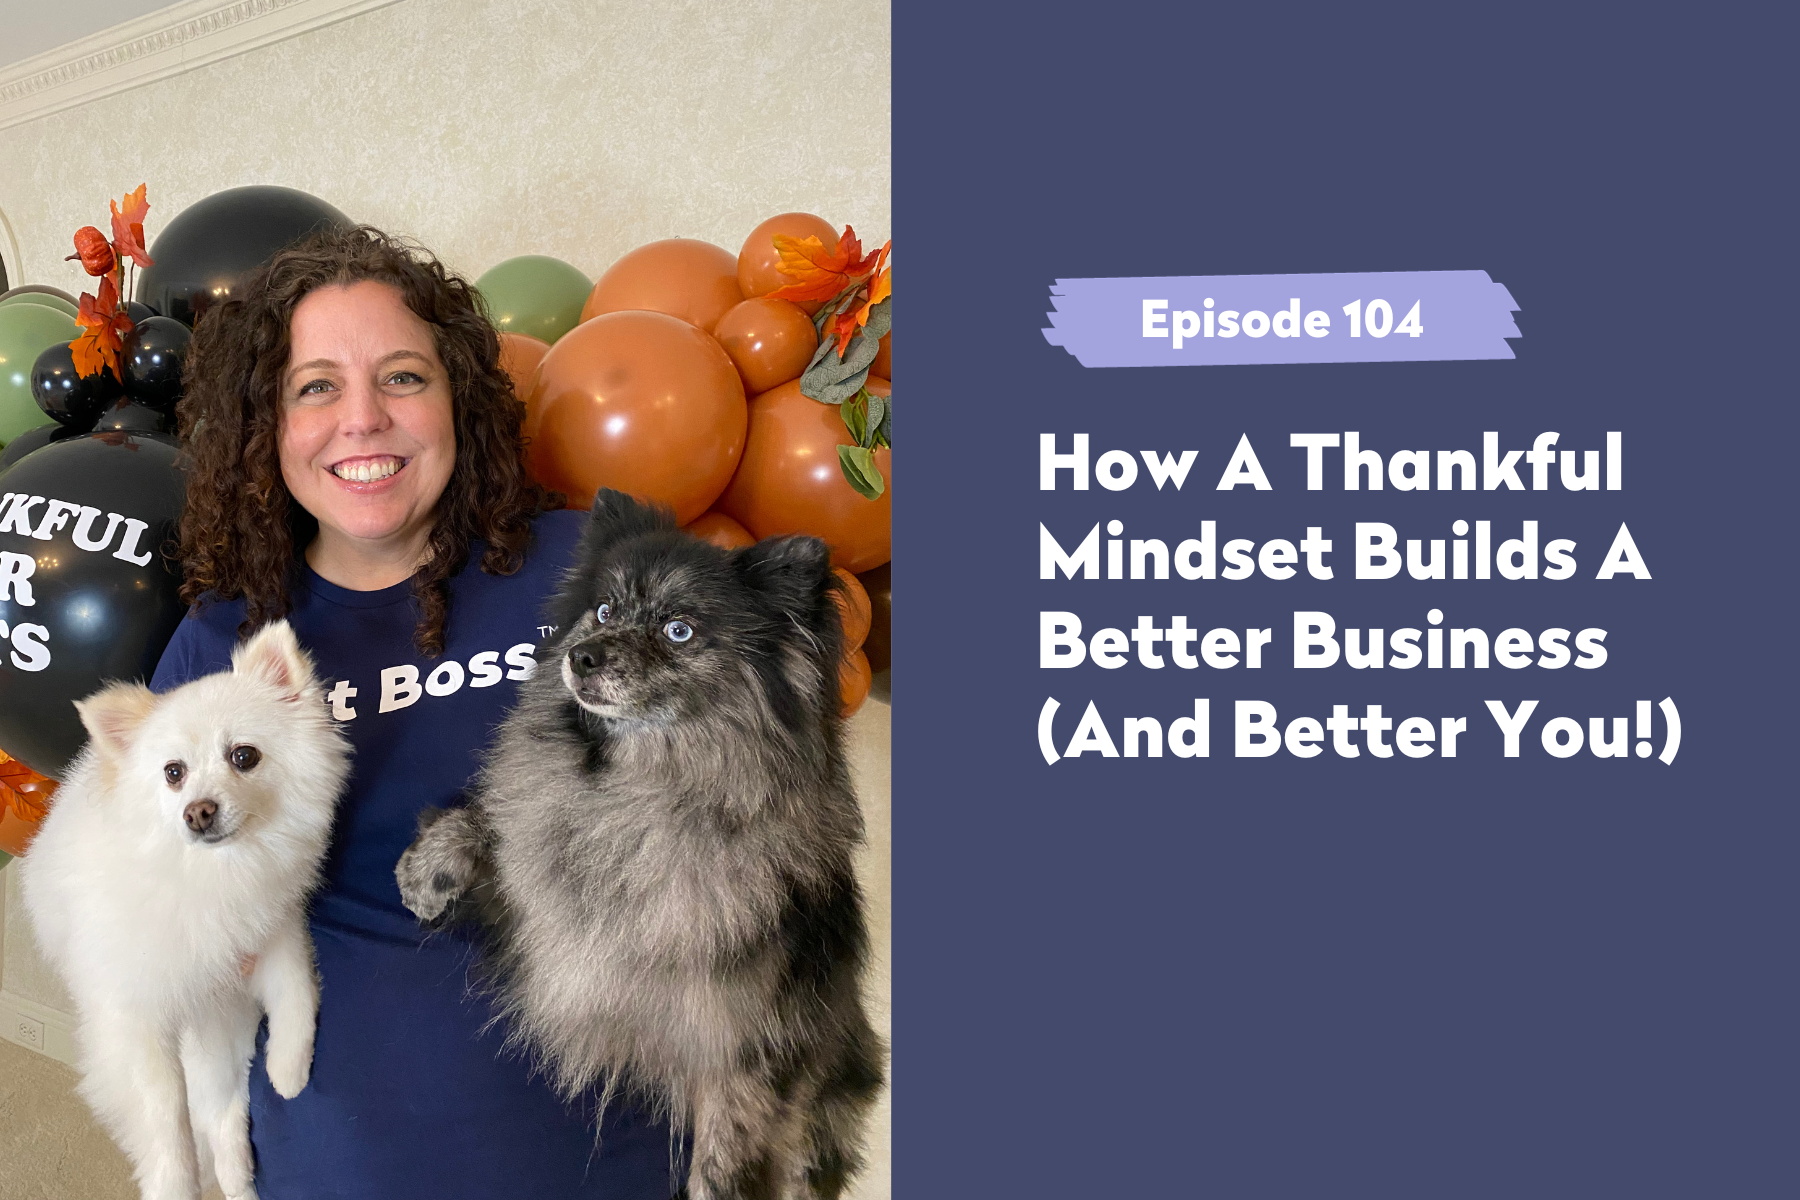 Episode 104 | How A Thankful Mindset Builds A Better Business (And Better You!)